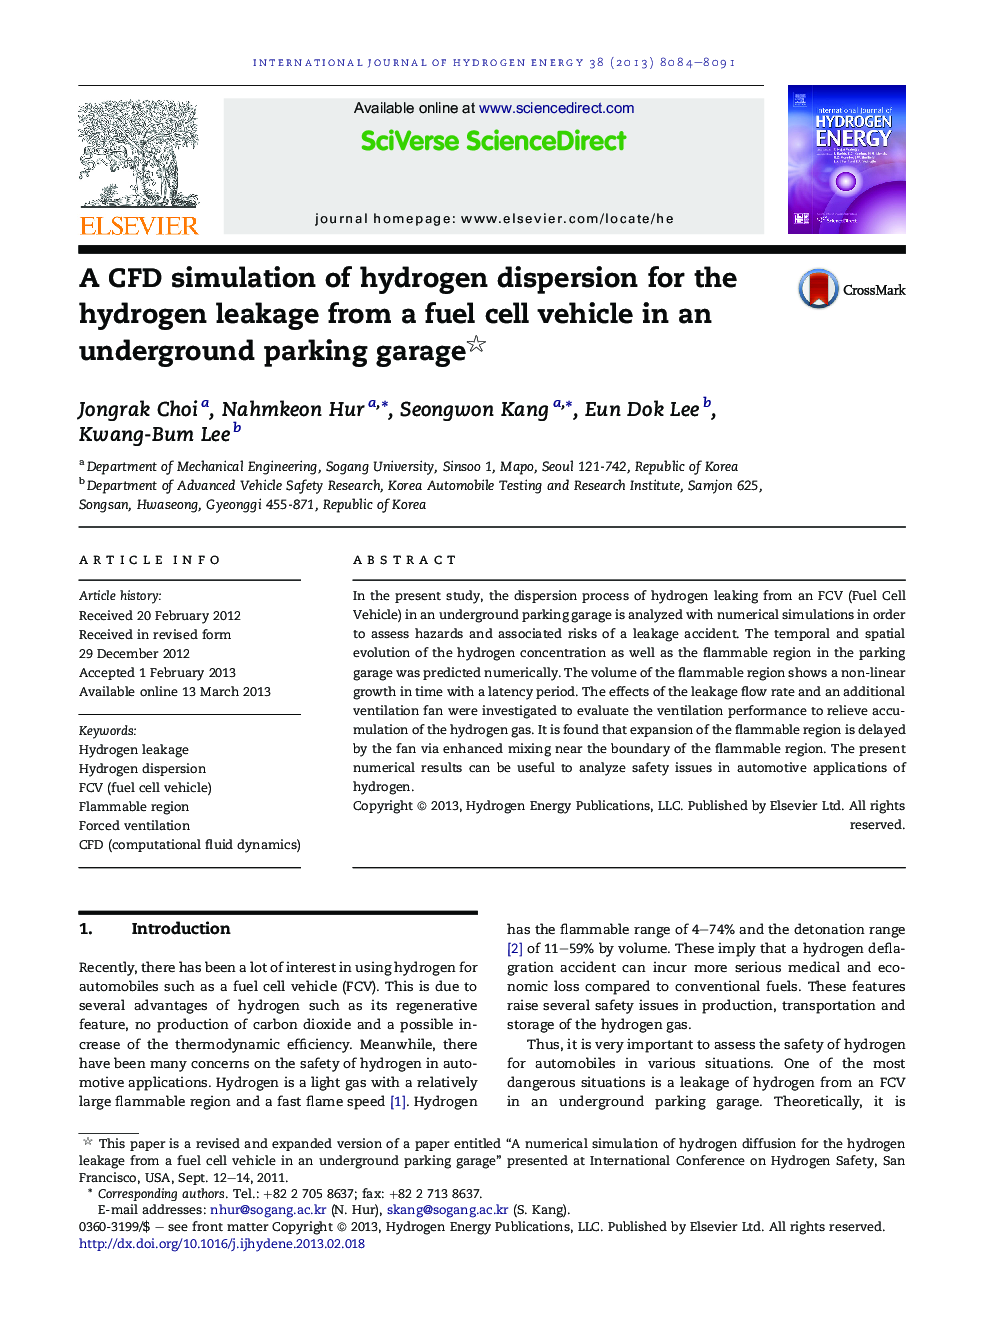 A CFD simulation of hydrogen dispersion for the hydrogen leakage from a fuel cell vehicle in an underground parking garage 